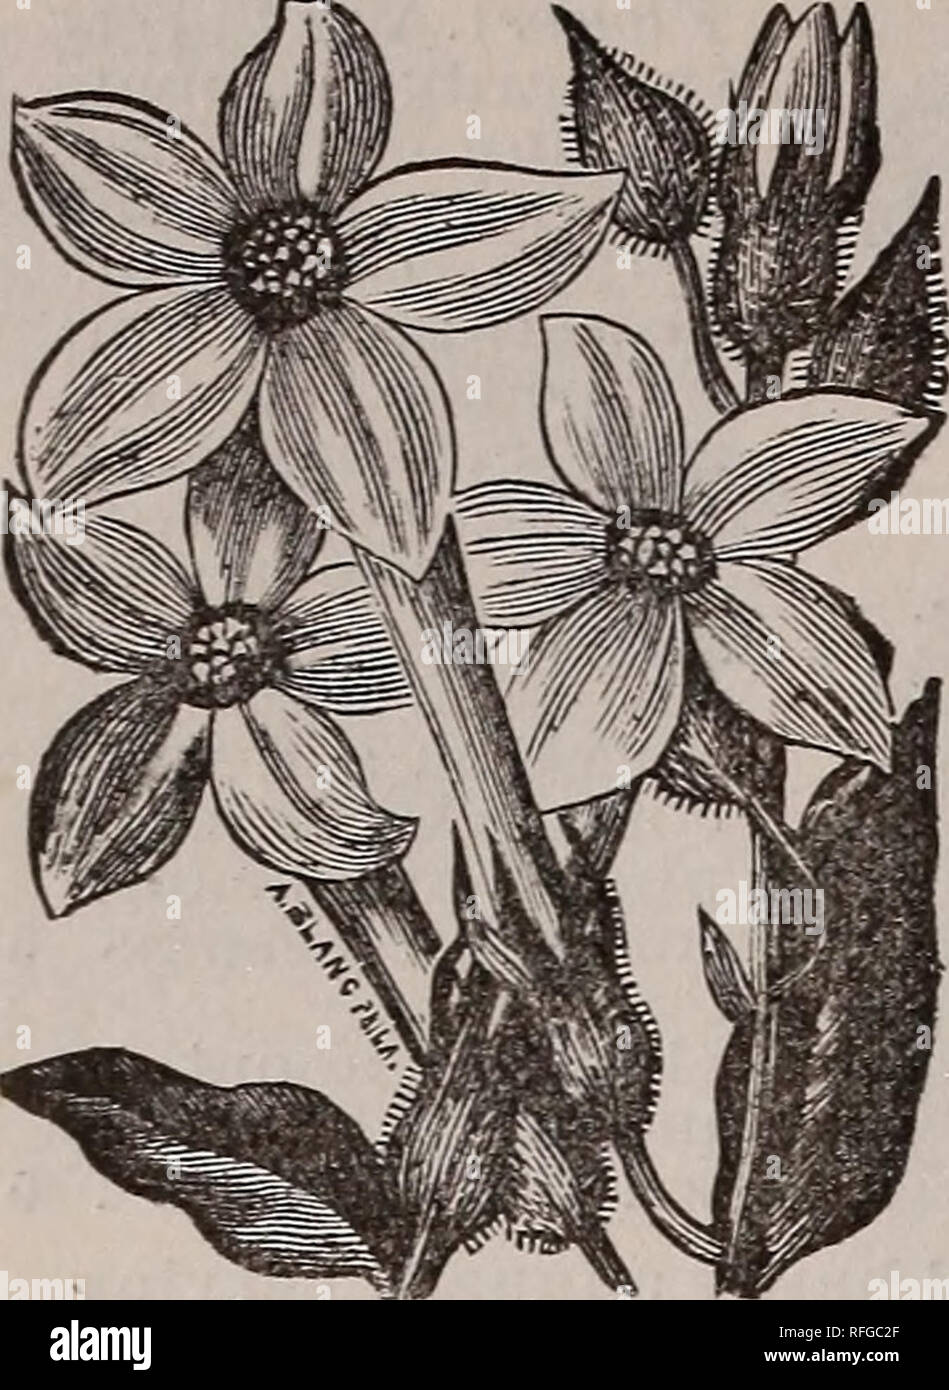 . Goodell's seed catalog. Nursery stock Massachusetts Catalogs; Flowers Catalogs; Vegetables Seeds Catalogs; Plants, Ornamental Catalogs. 24 GOODELL'S SEED CATALOG.. (h natural size.) NICOTIANA affinis {Evening Stars J. One of the finest annuals of recent intro- duction. The plants grow about three feet tall and bloom profusely all summer. The flowers are white, two or three in- ches long and about as much in diameter, and are very sweet-scent- ed, a small bed filling a whole garden with fra- grance. 11 also succeeds admira- bly as a house plant. The plants can be taken up in the fall, cut bac Stock Photo